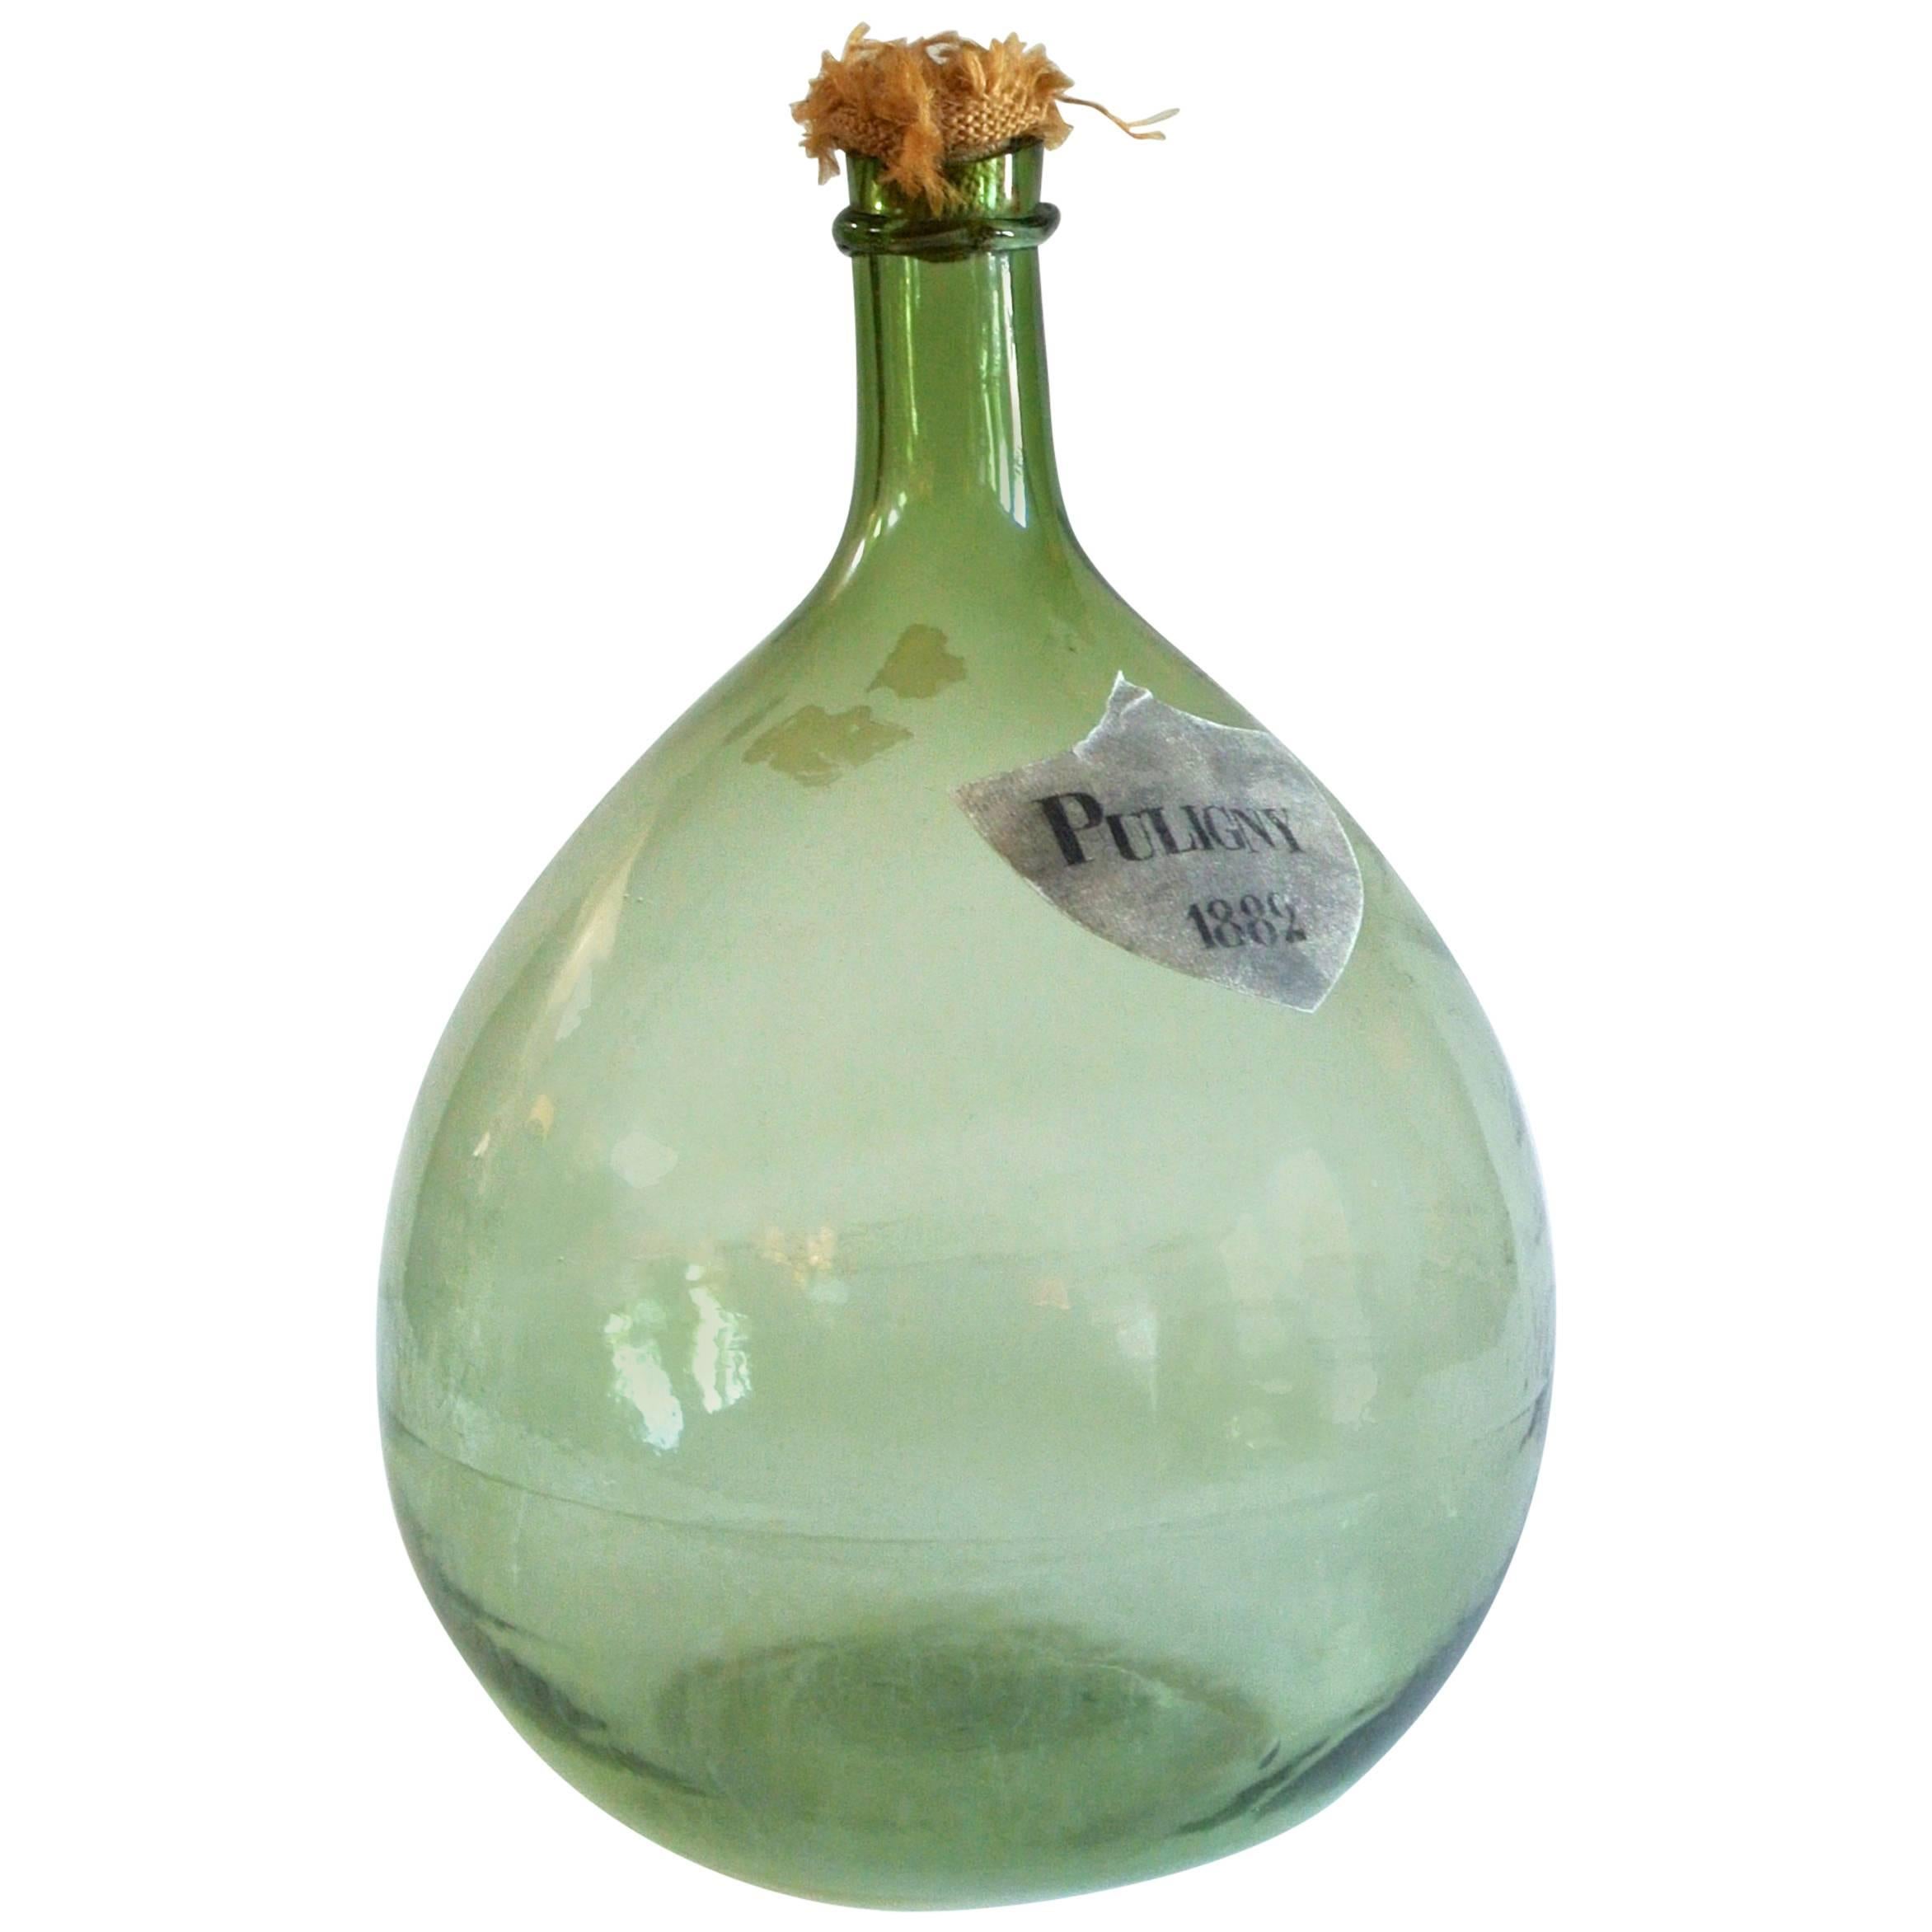 Green Blown Glass Bottle with "Puligny 1882" Label from Italy 